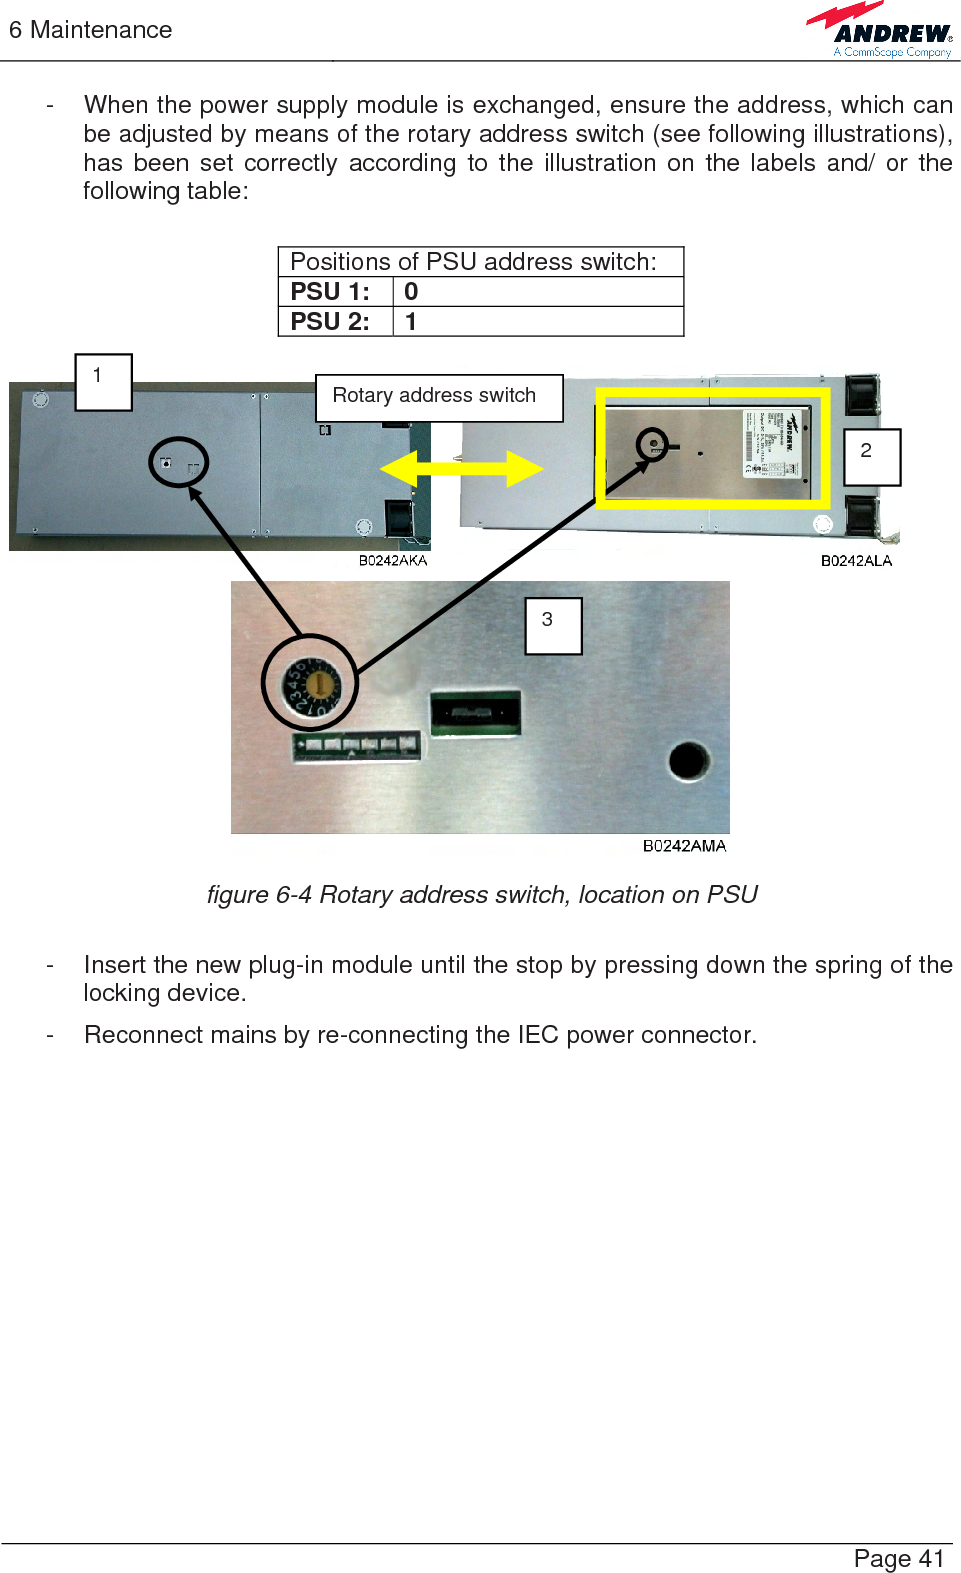 6 Maintenance   Page 41 -  When the power supply module is exchanged, ensure the address, which can be adjusted by means of the rotary address switch (see following illustrations), has been set correctly according to the illustration on the labels and/ or the following table:  Positions of PSU address switch: PSU 1:  0 PSU 2:  1      figure 6-4 Rotary address switch, location on PSU  -  Insert the new plug-in module until the stop by pressing down the spring of the locking device. -  Reconnect mains by re-connecting the IEC power connector.  Rotary address switch 1 2 3 